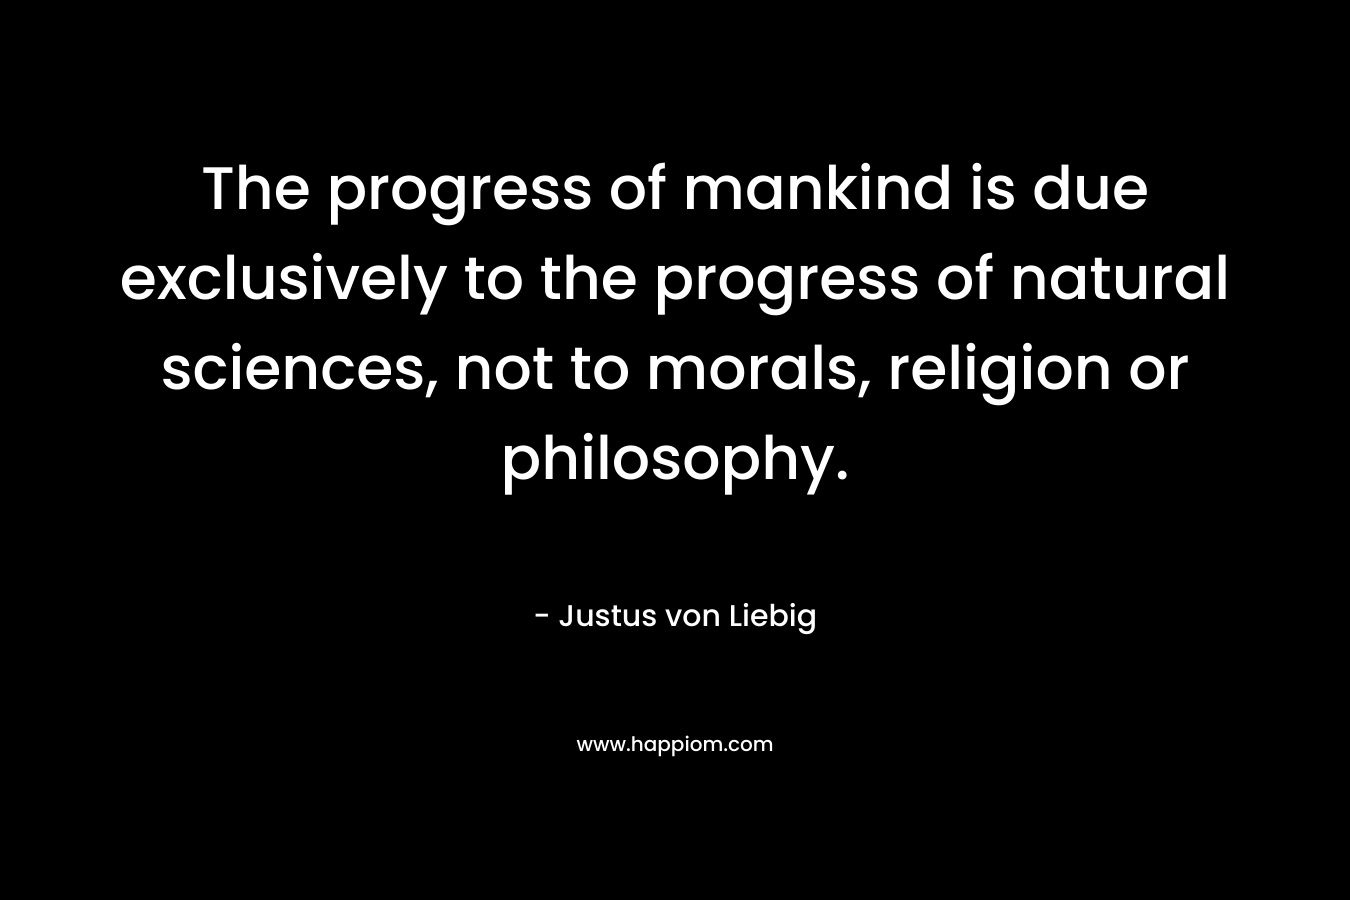 The progress of mankind is due exclusively to the progress of natural sciences, not to morals, religion or philosophy. – Justus von Liebig